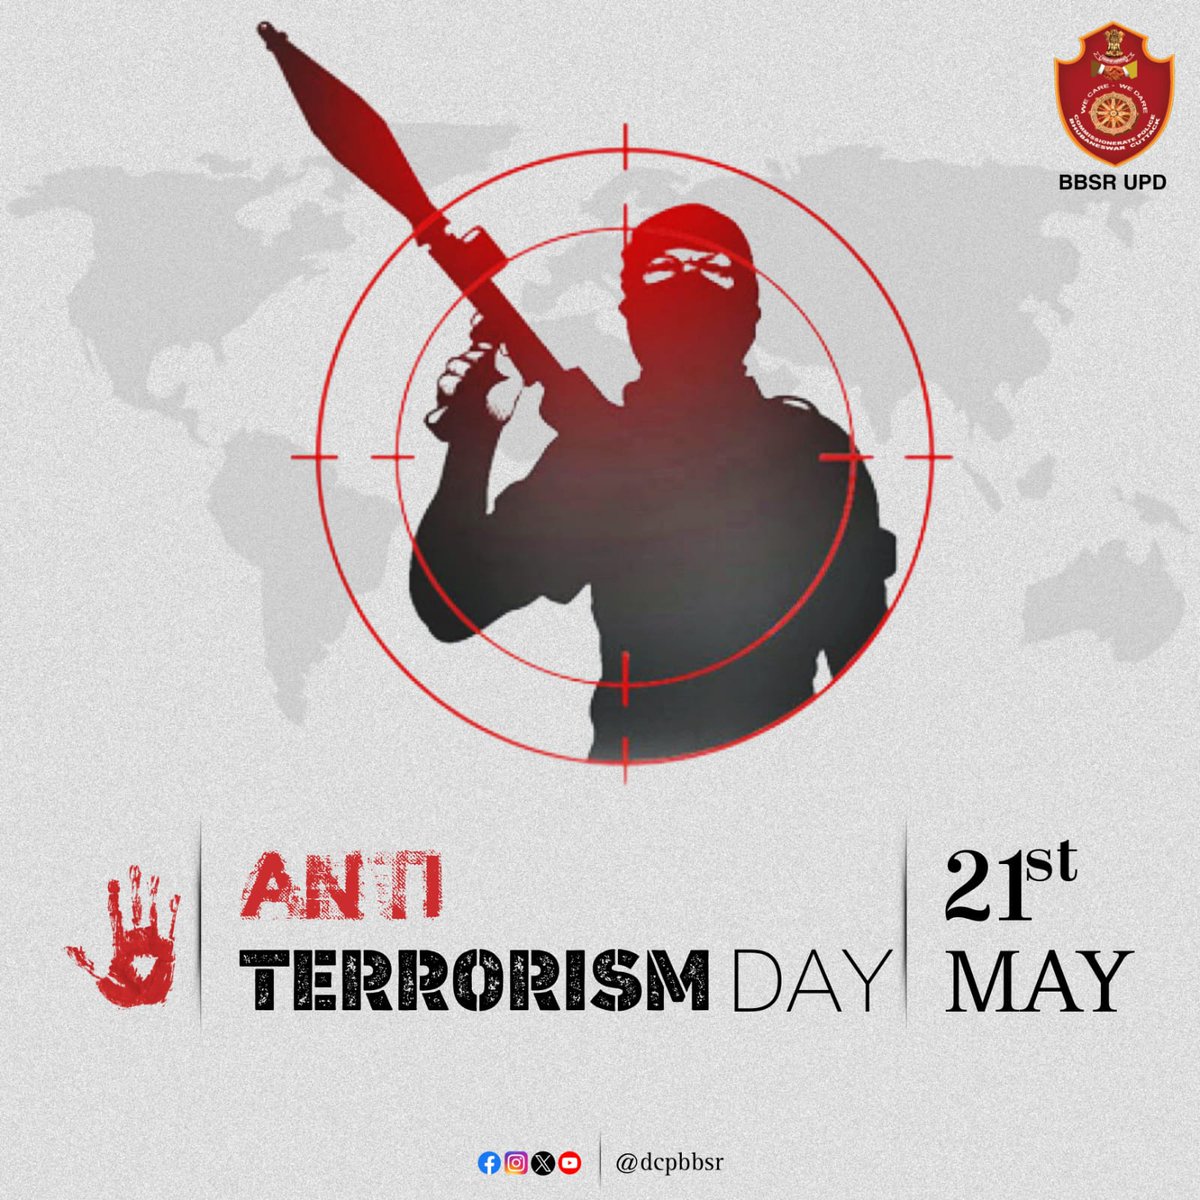 On this #AntiTerrorismDay2024, let's stand together against violence and work towards a world of peace and unity.Let's create a future free from fear.
#WeCareWeDare #EndTerrorism
#UniteForPeace #SpreadPeace